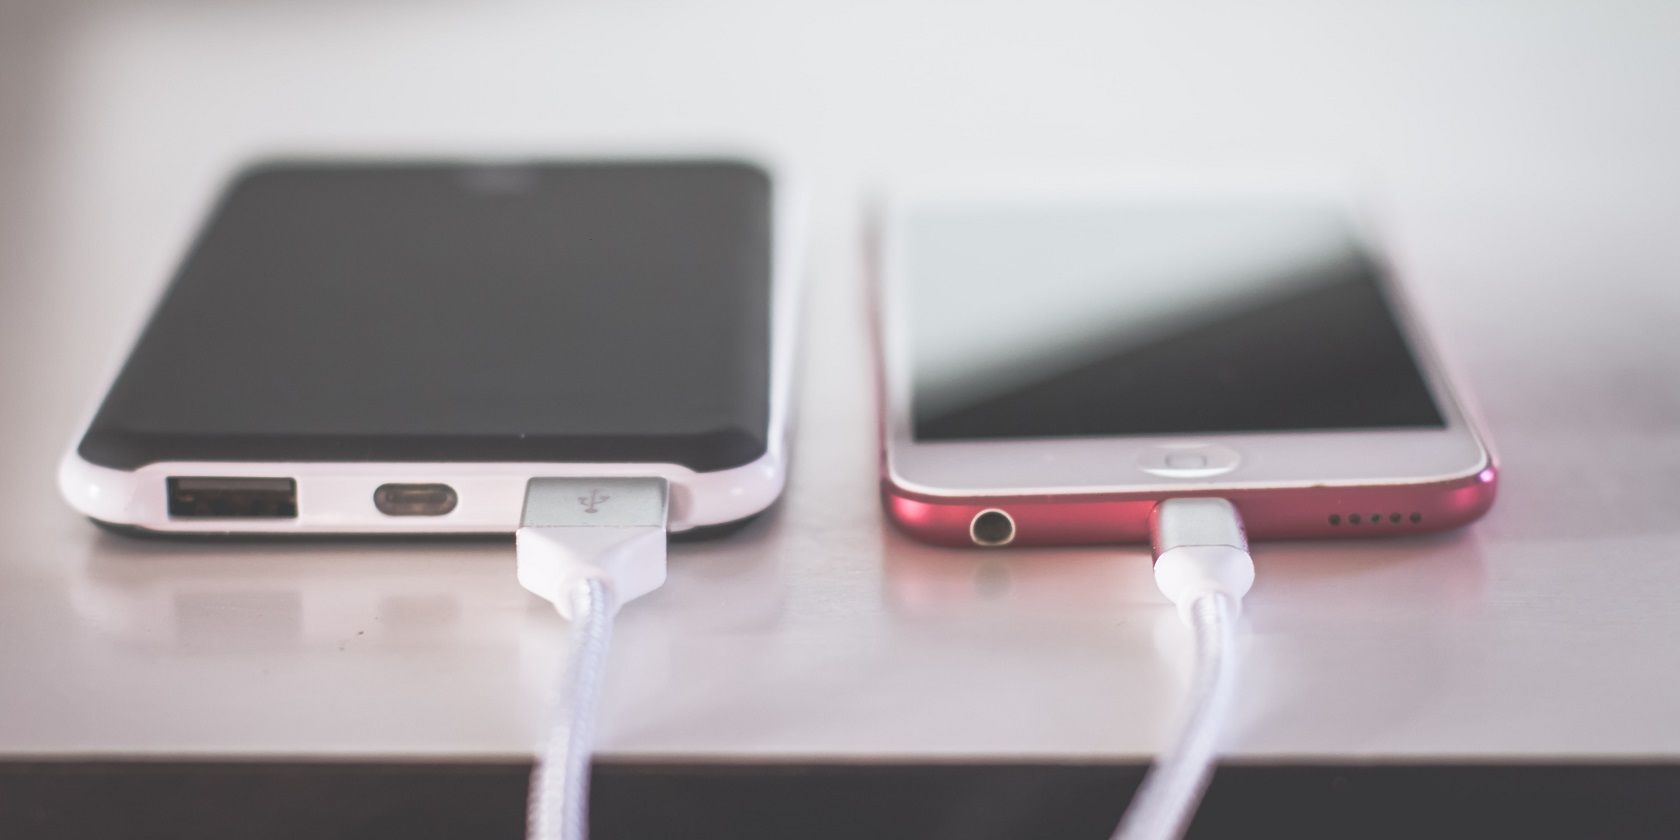 Photo of two phones charging next to each other